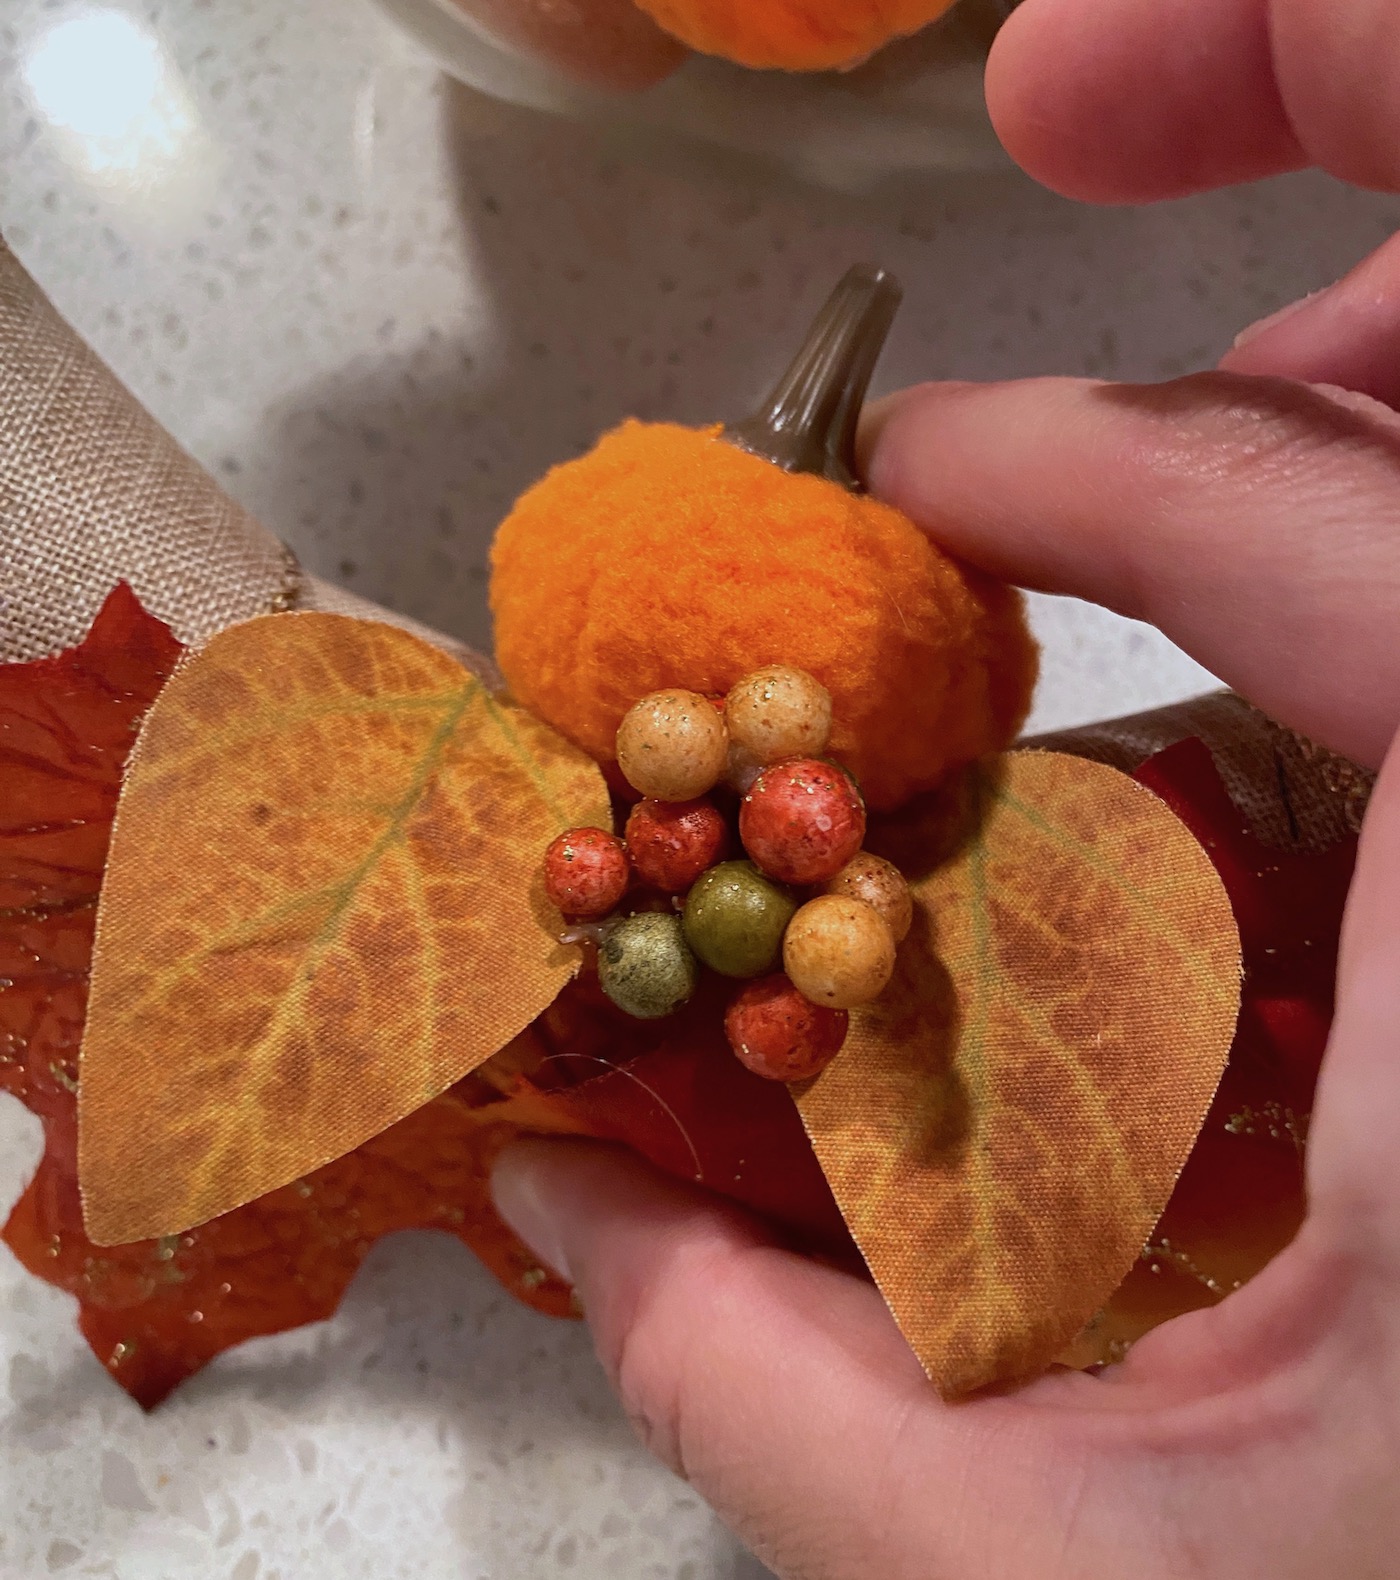 Pressing the pumpkin into the wreath form